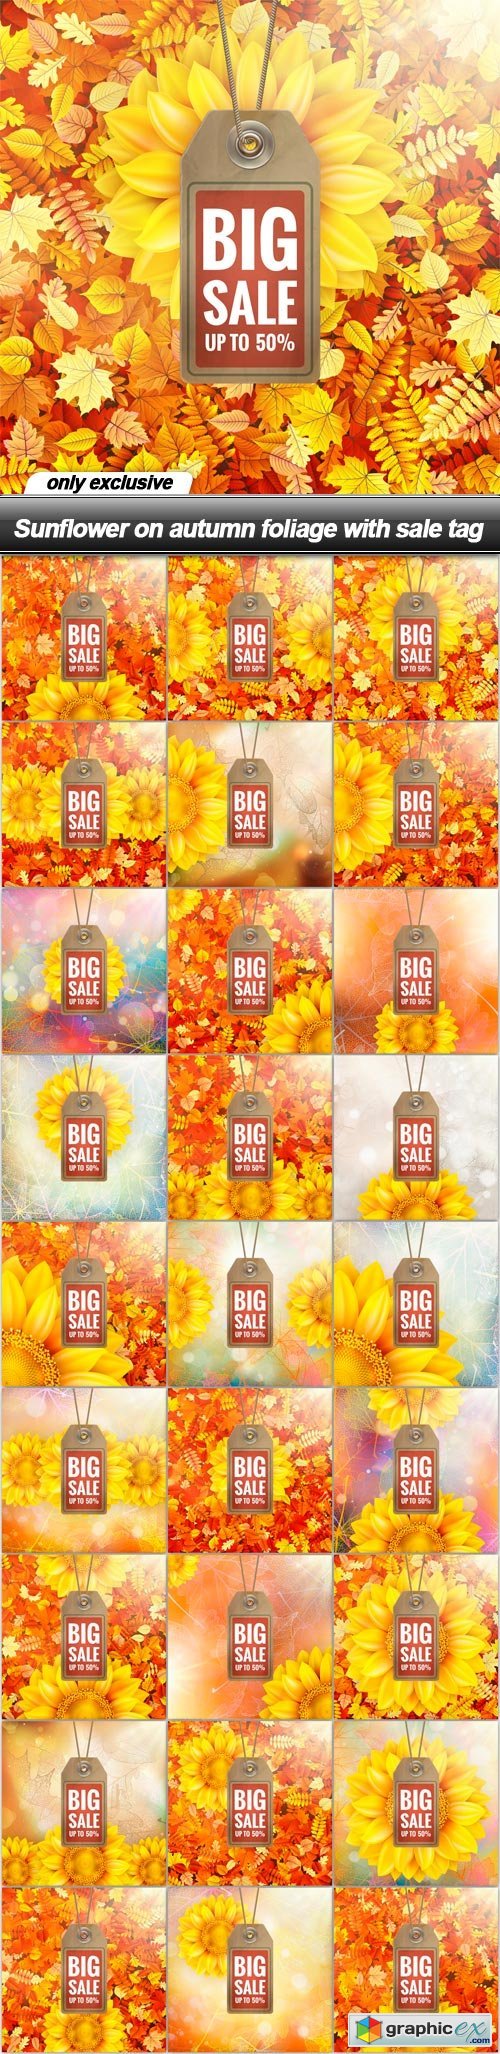 Sunflower on autumn foliage with sale tag - 26 EPS